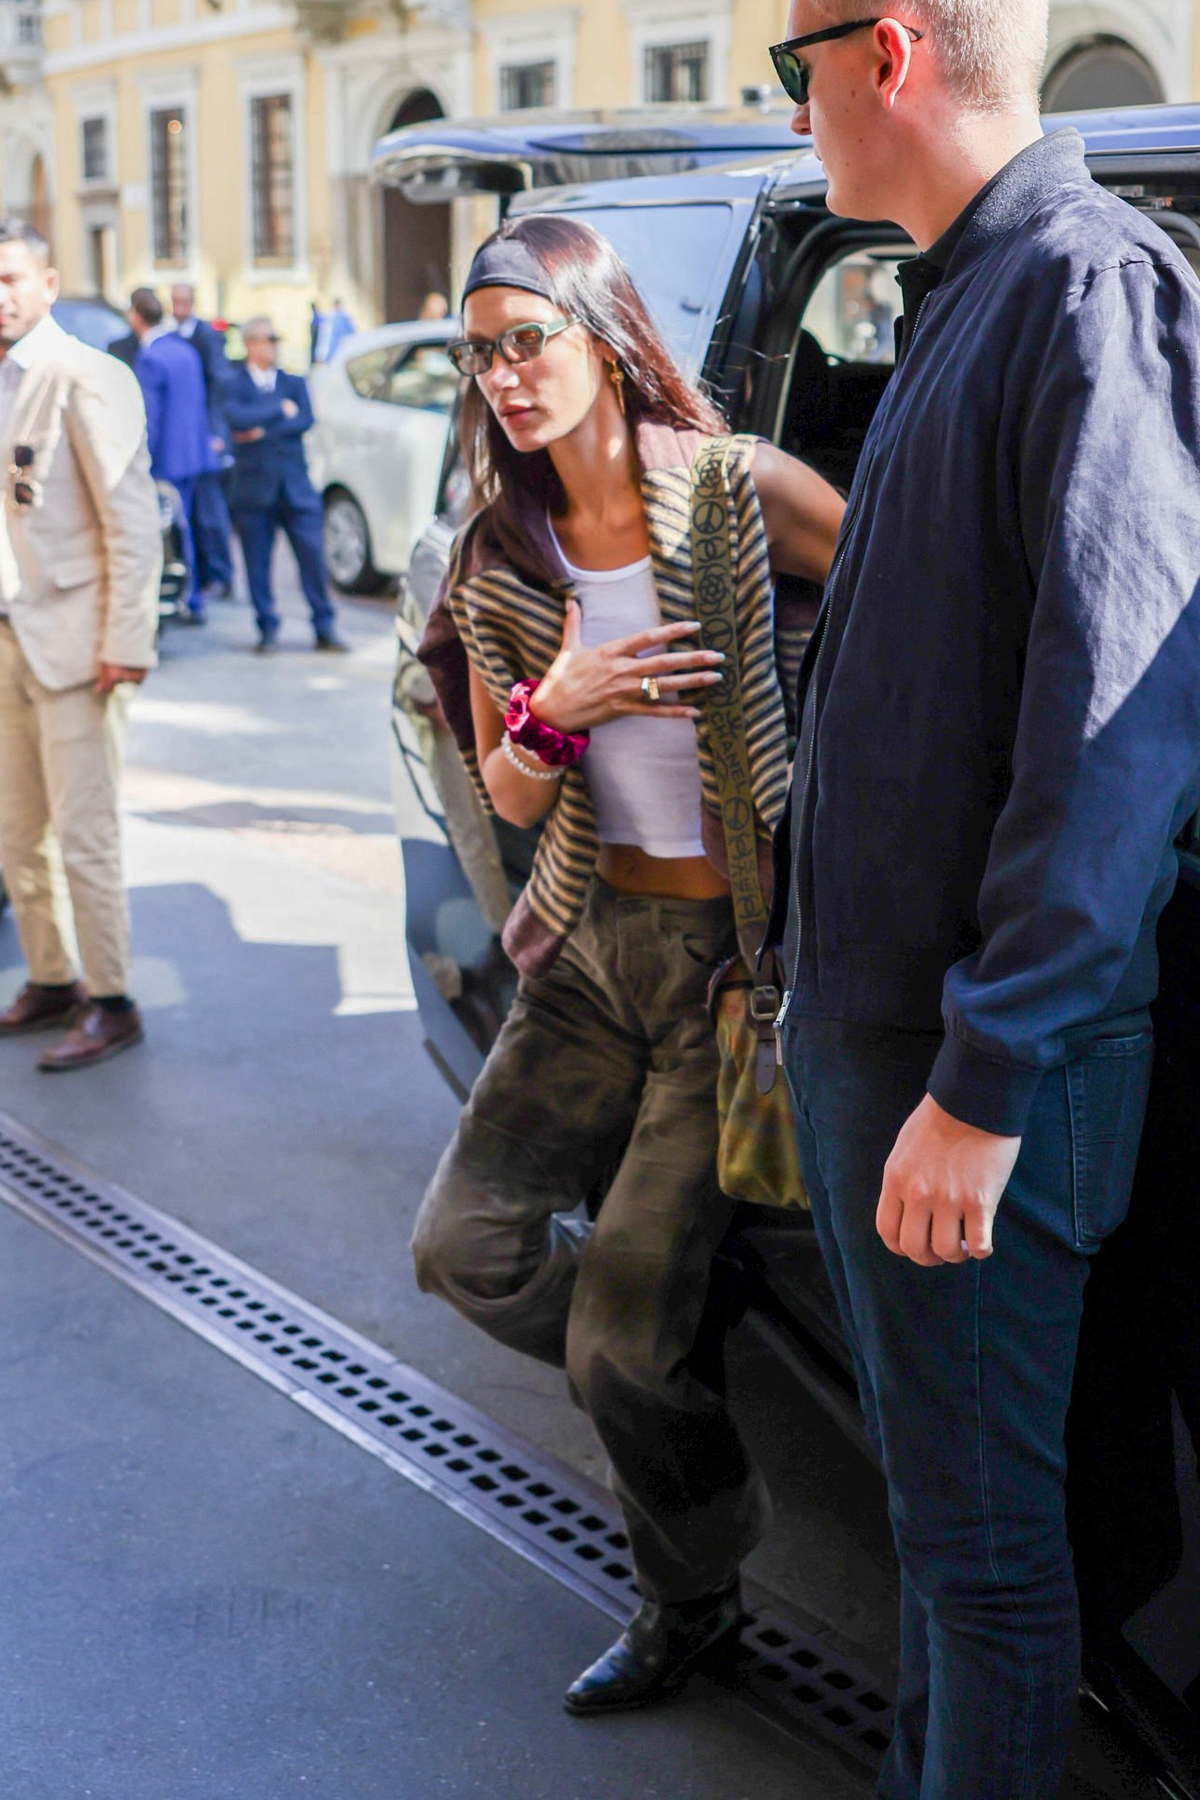 Bella Hadid Arriving in Milan February 22, 2022 – Star Style